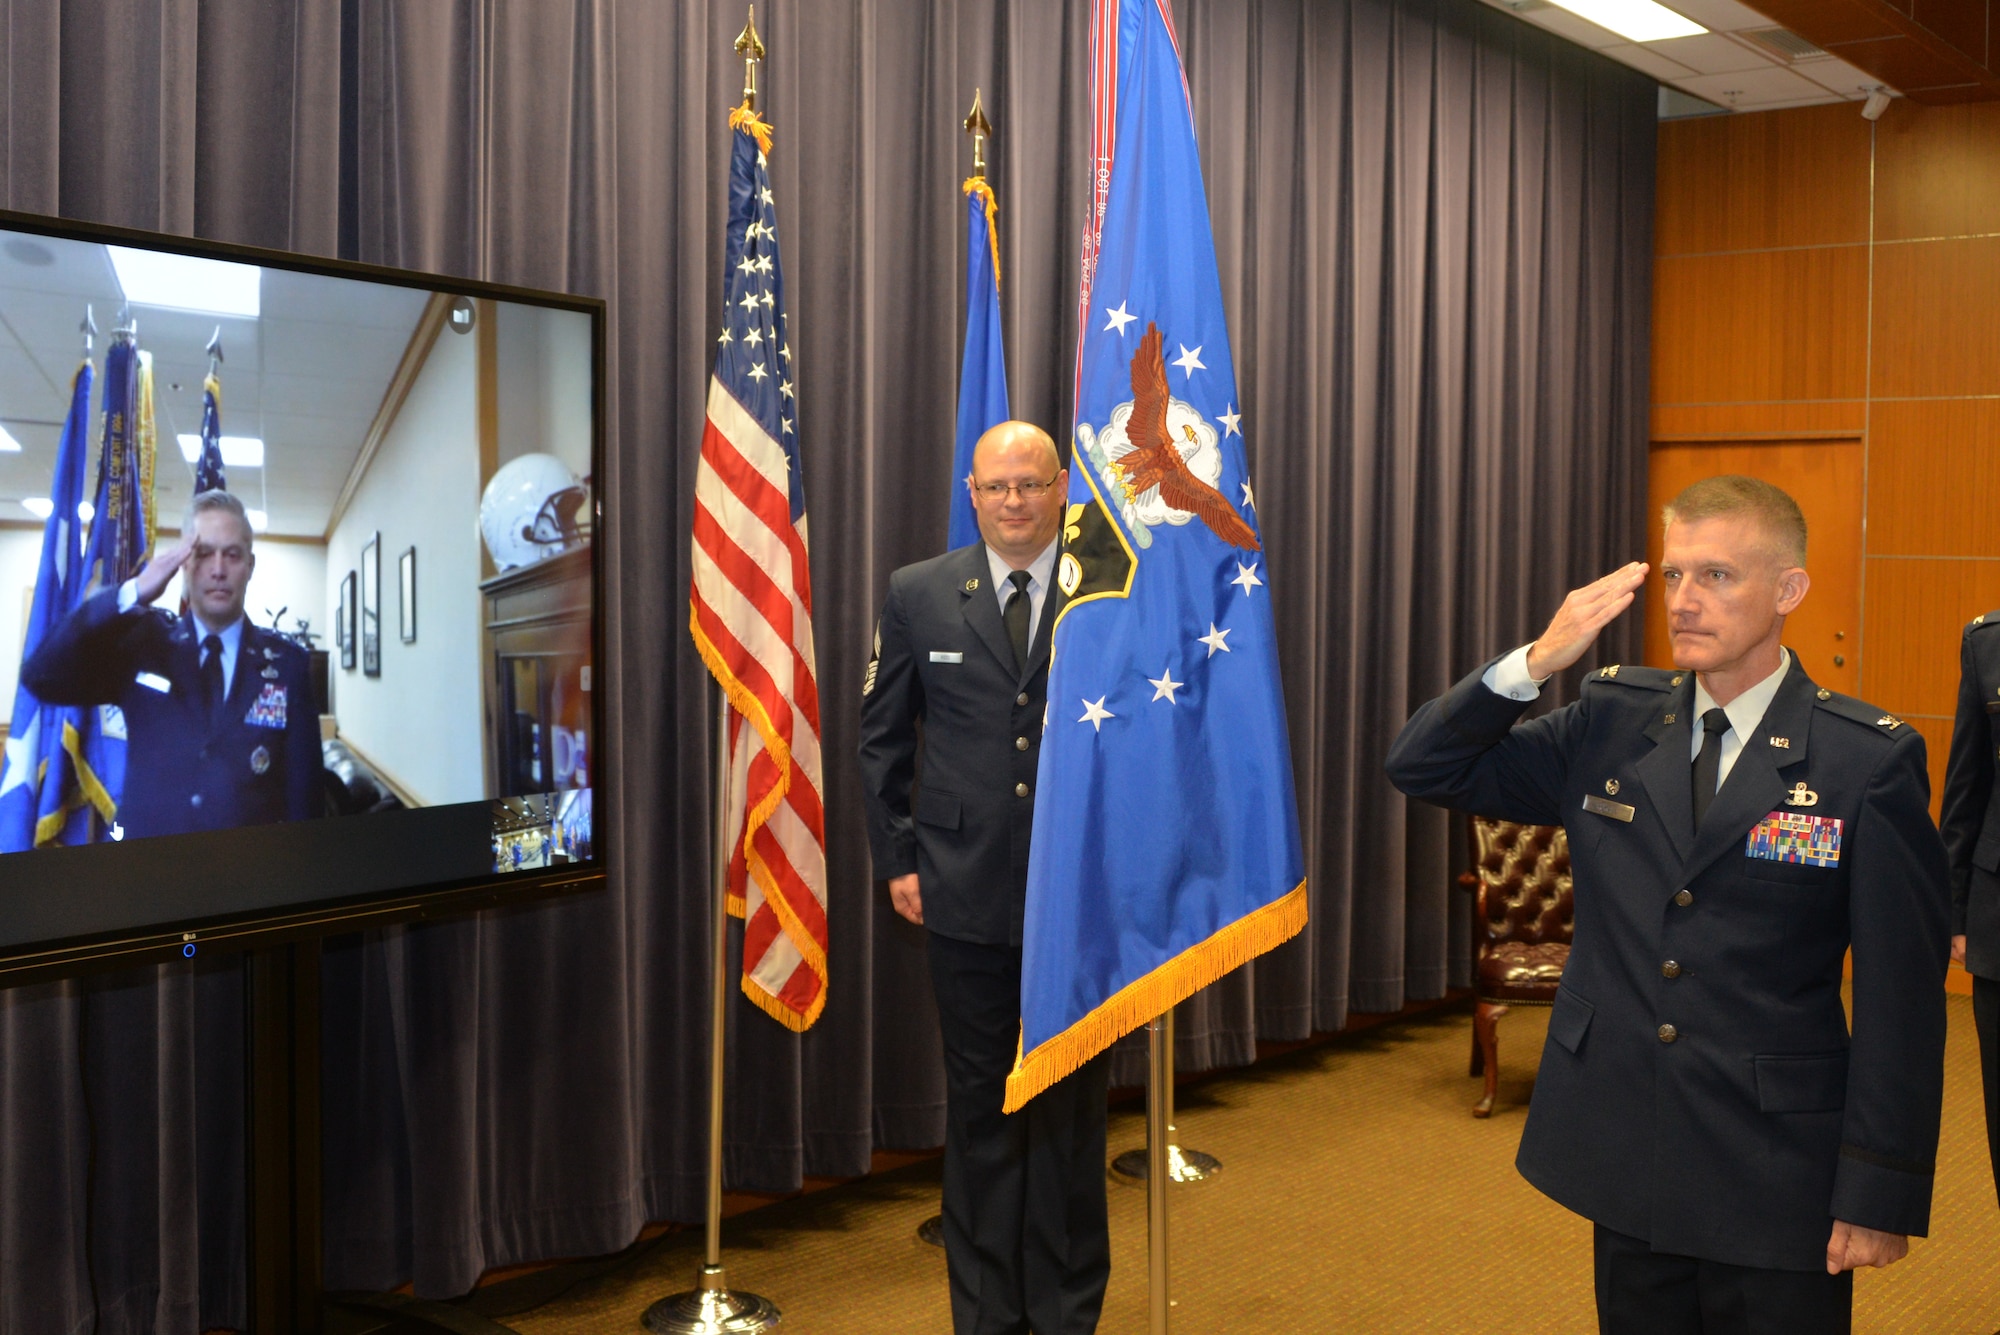 Lt. Gen. Timothy Haugh, Sixteenth Air Force (Air Forces Cyber) commander, salutes Col. Brian Pukall, 557th Weather Wing commander, through a video conference link as he relinquishes command of the wing during a change of command ceremony at the 557th Weather Wing headquarters building, Offutt Air Force Base, Nebraska, June 25, 2020.